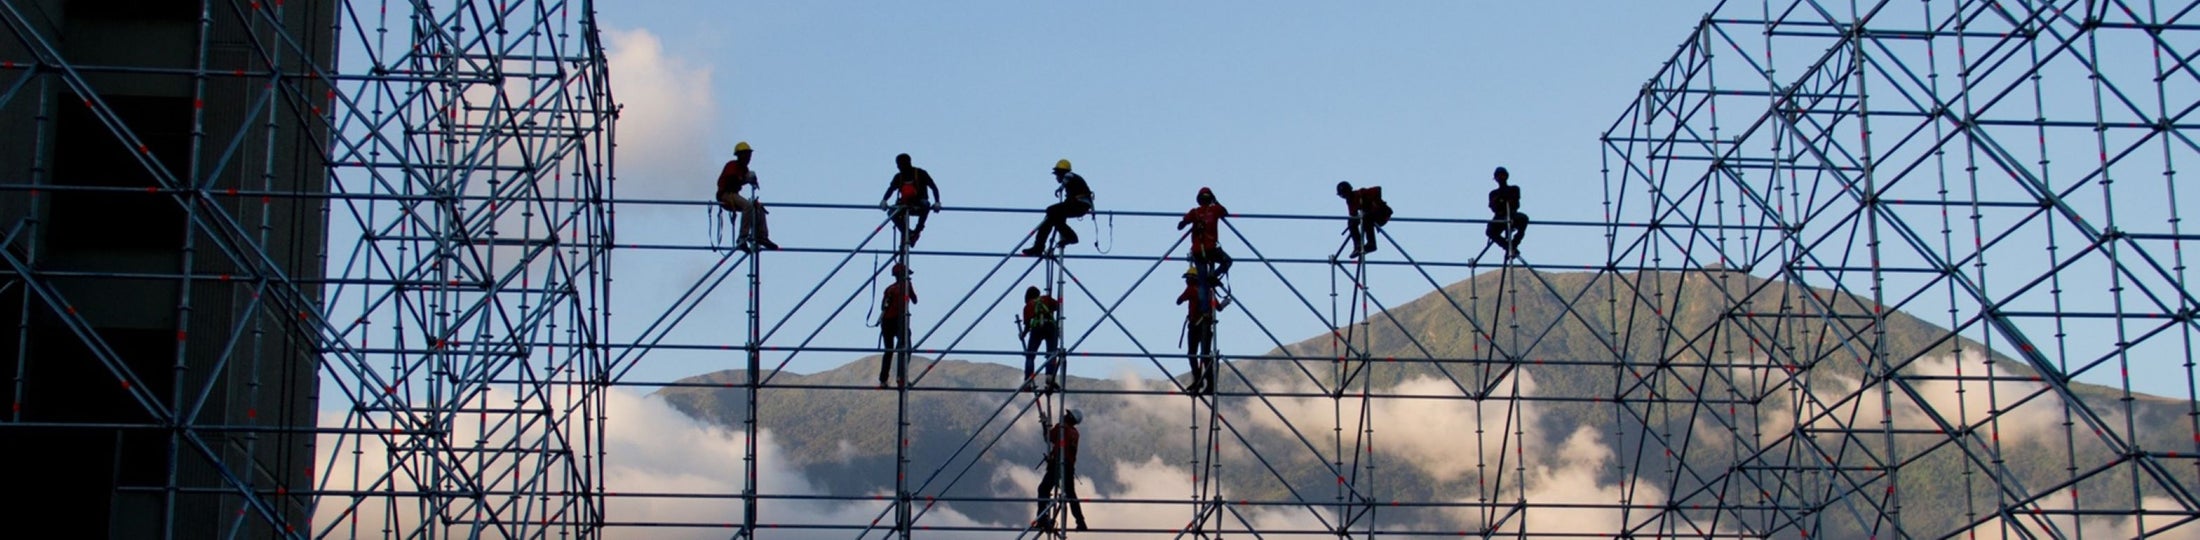 People at work on a scaffolding